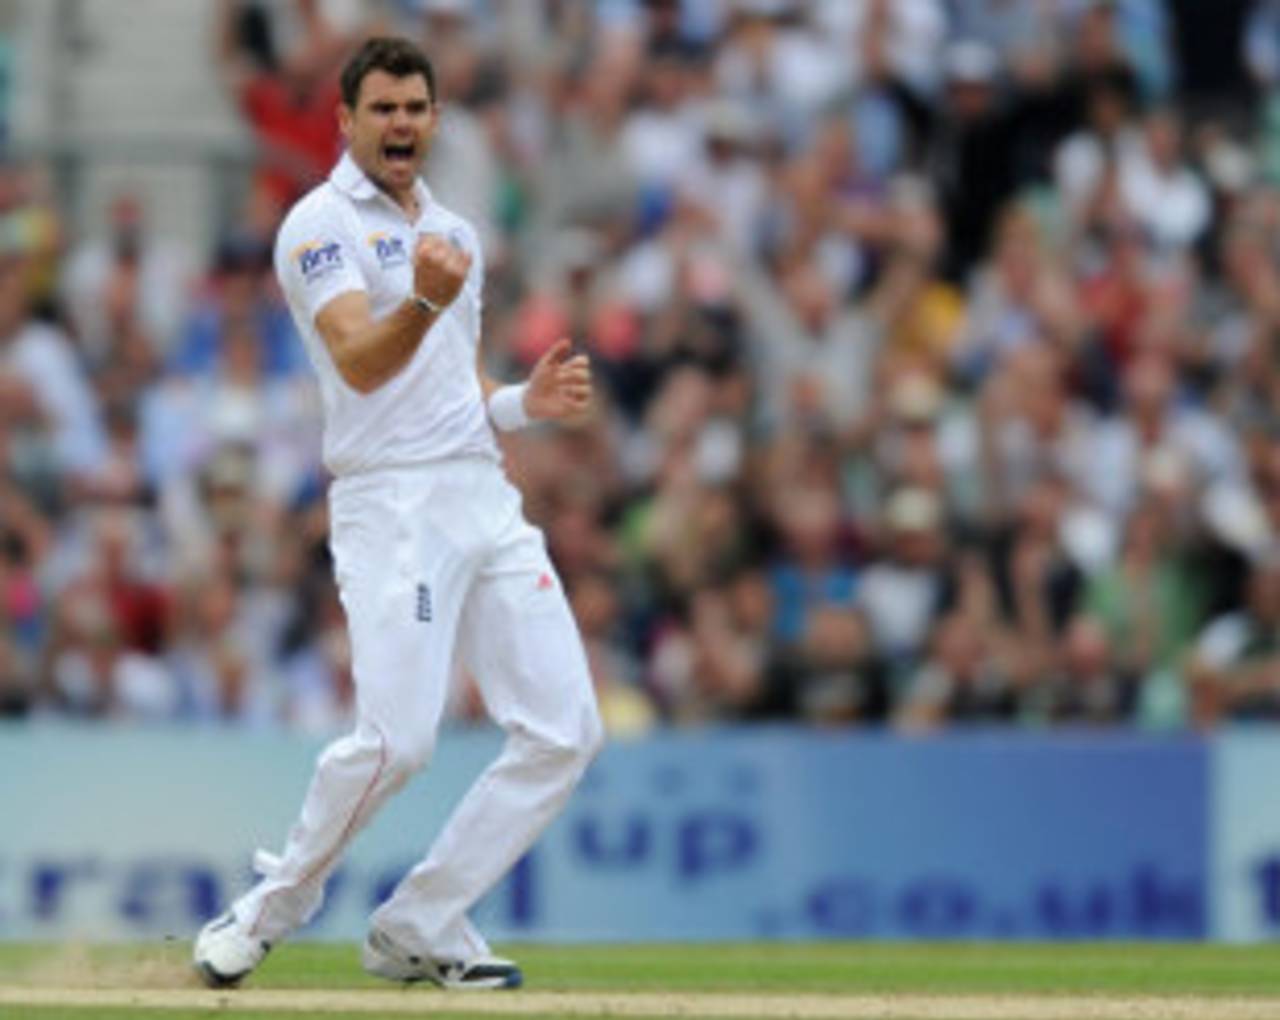 James Anderson got the early wicket of Alviro Petersen, England v South Africa, 1st Investec Test, The Oval,  2nd day, July 20, 2012